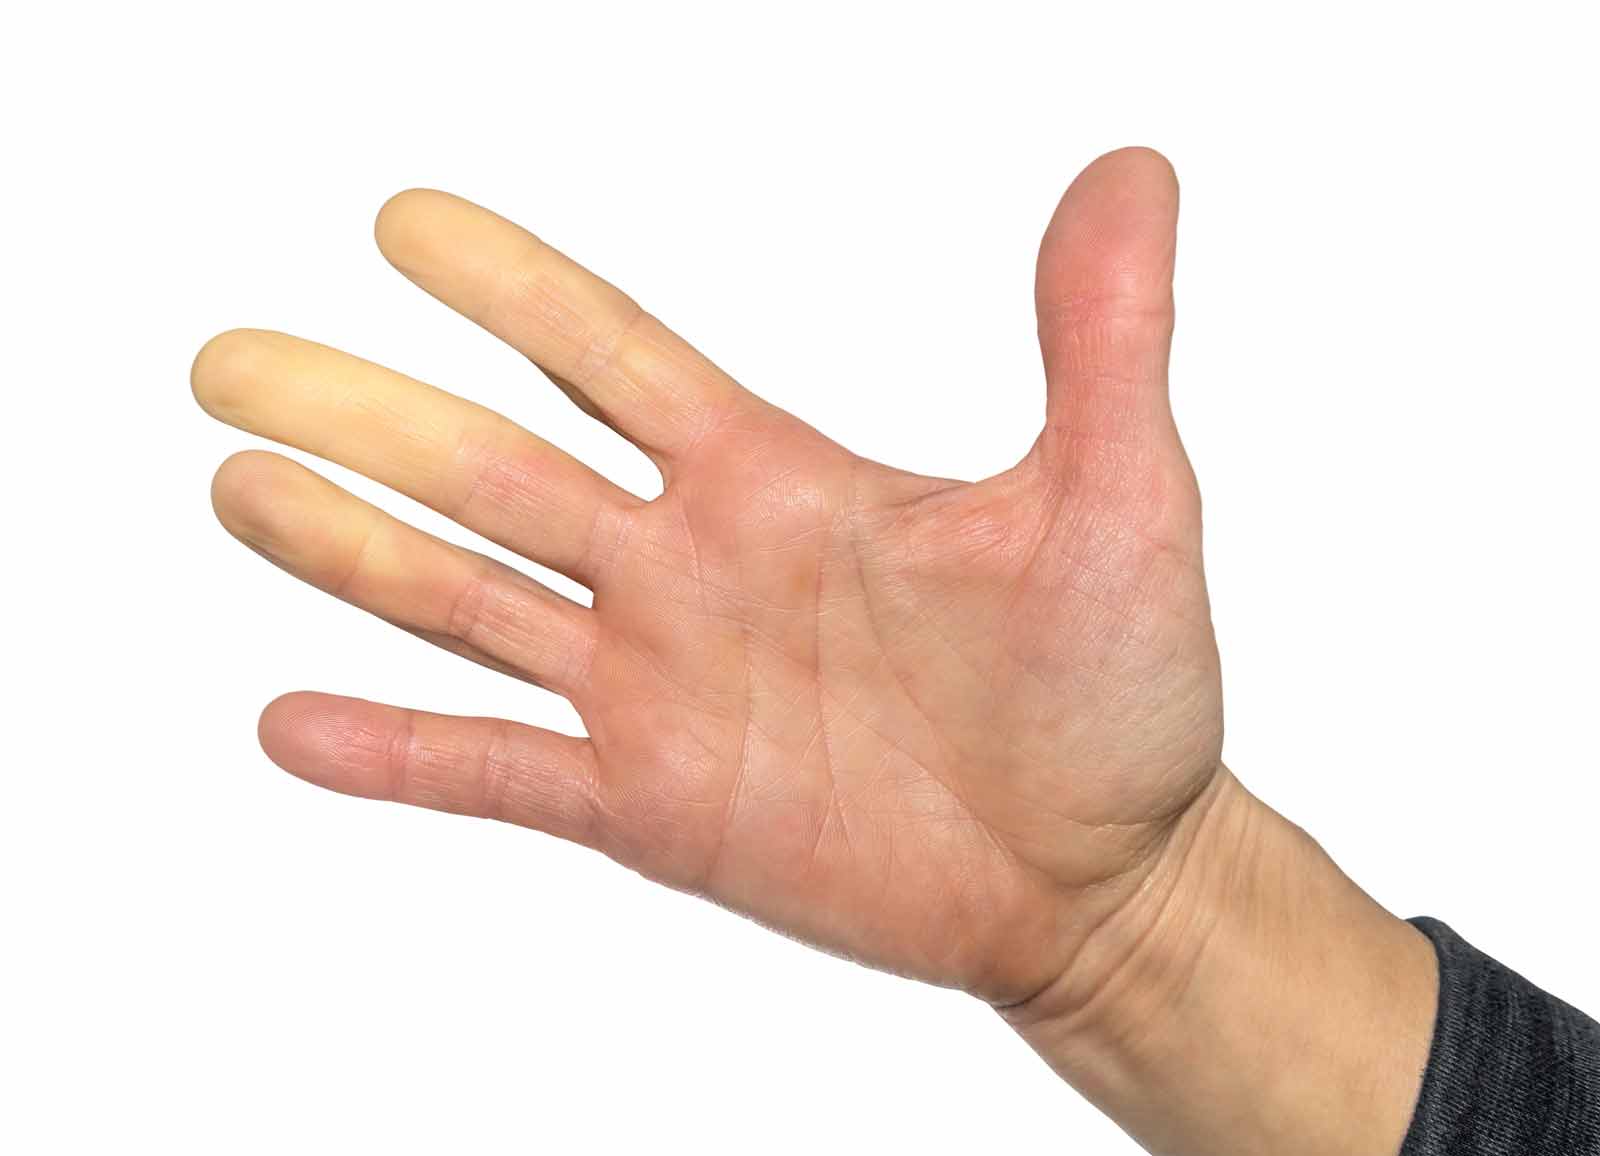 raynaud's phenomenon shows fingers looking white due to lack of akdquate blood circulation